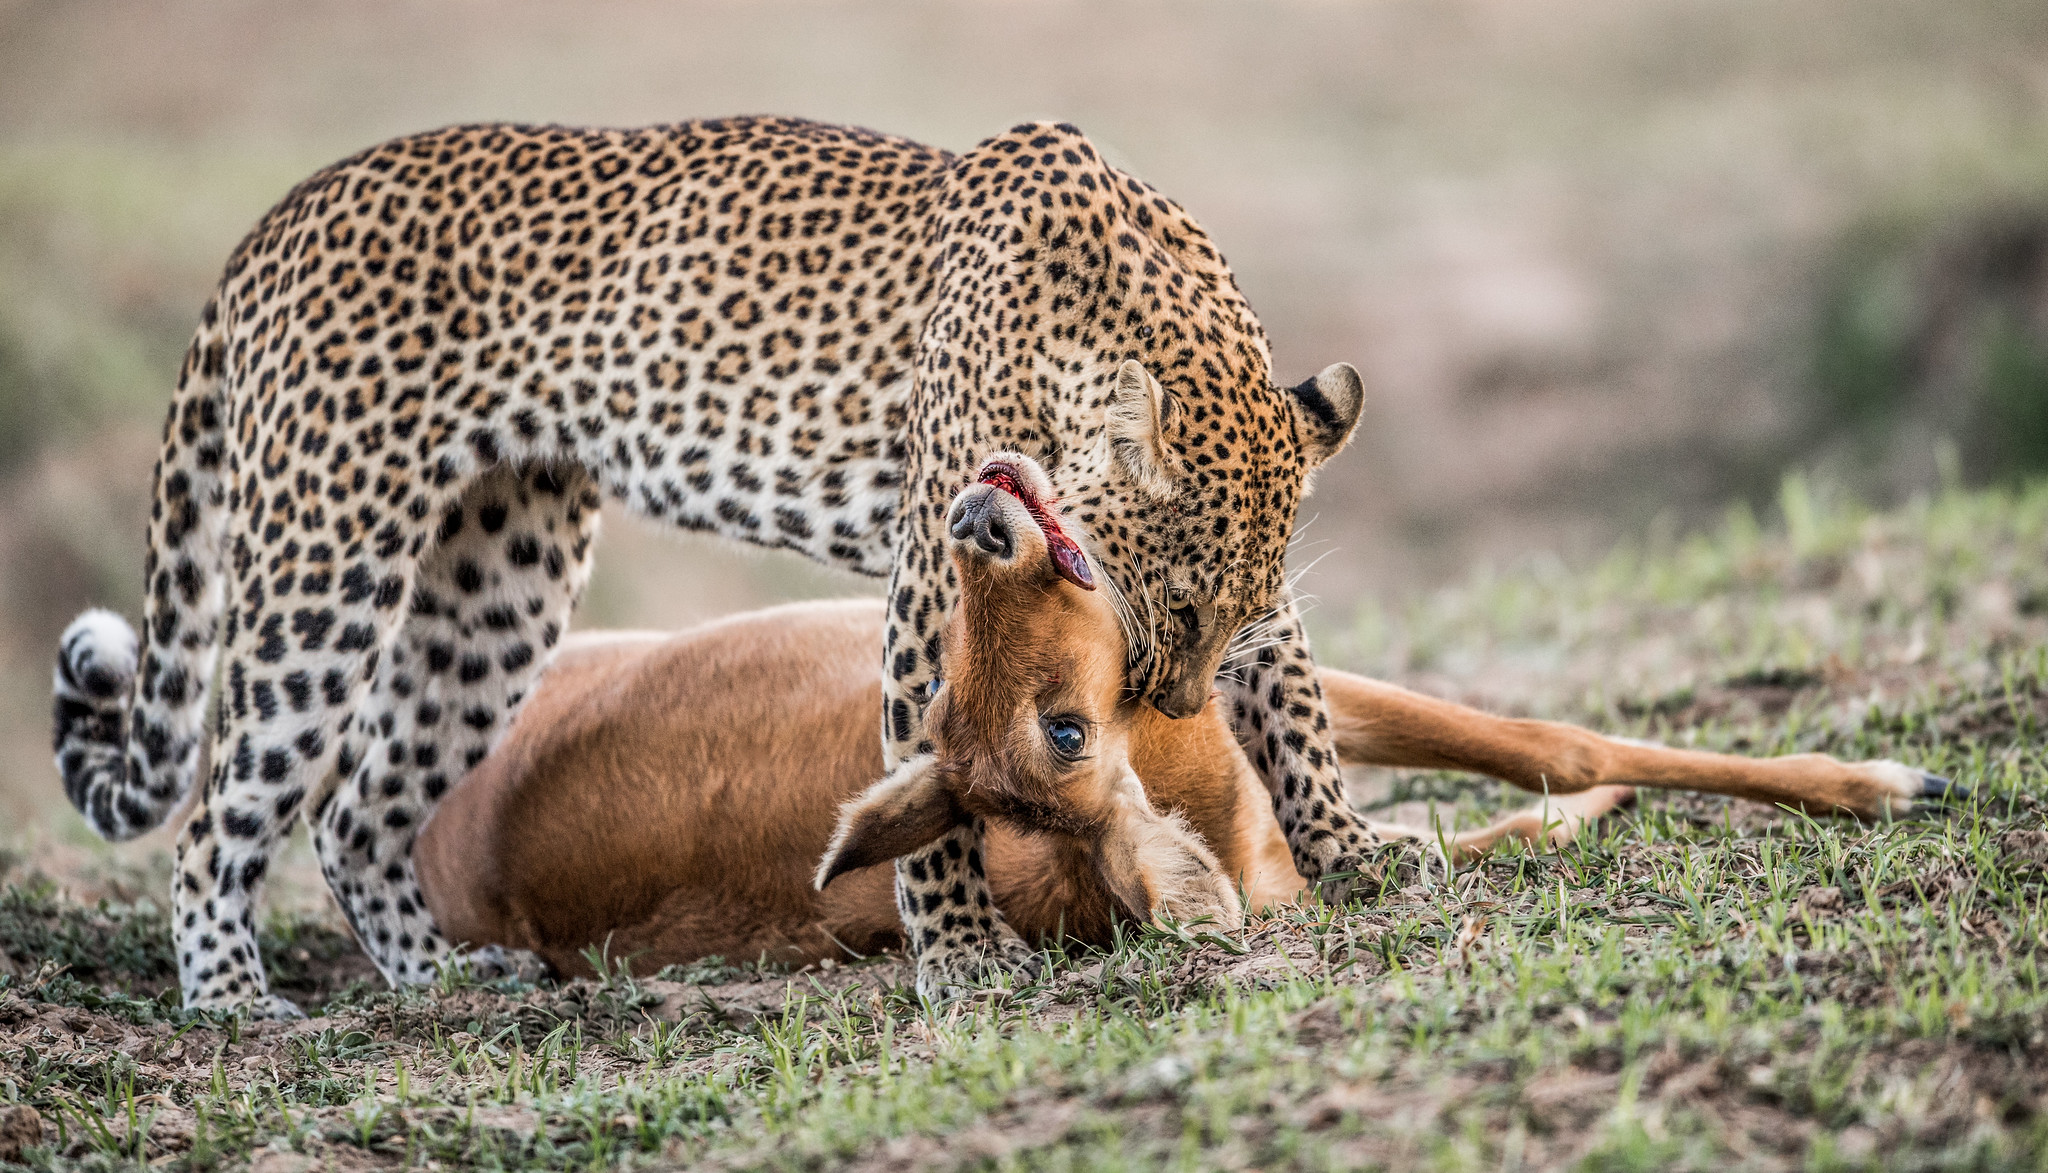 Free photo The leopard had caught an antelope